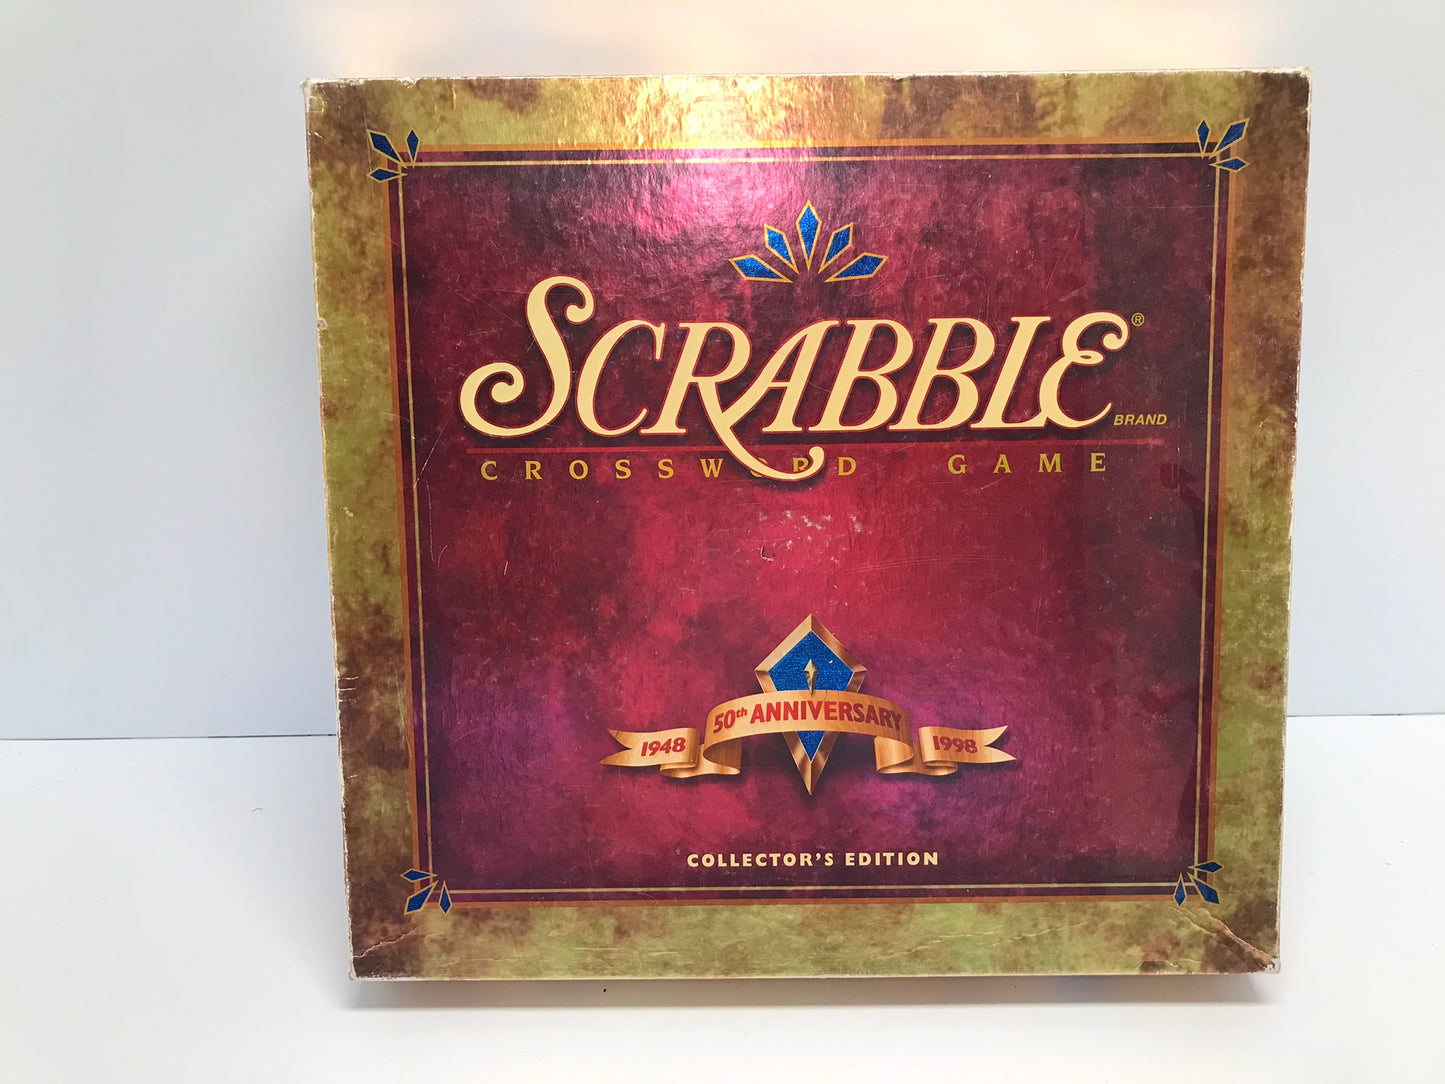 Game 1998 Scrabble 50th Anniversary Turntable Board Vintage Complete 2 Letters Were Replaced Rare